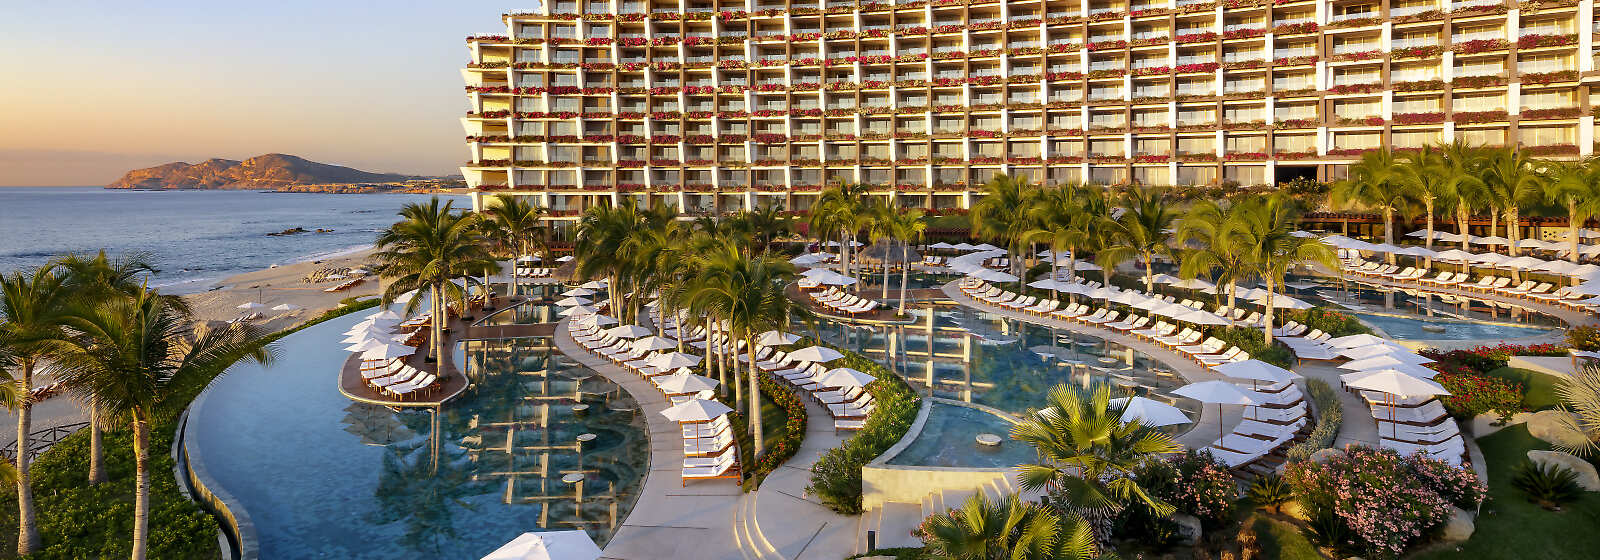 Hero shot of the resort. Grand Velas Los Cabos panoramic view with pool area. 